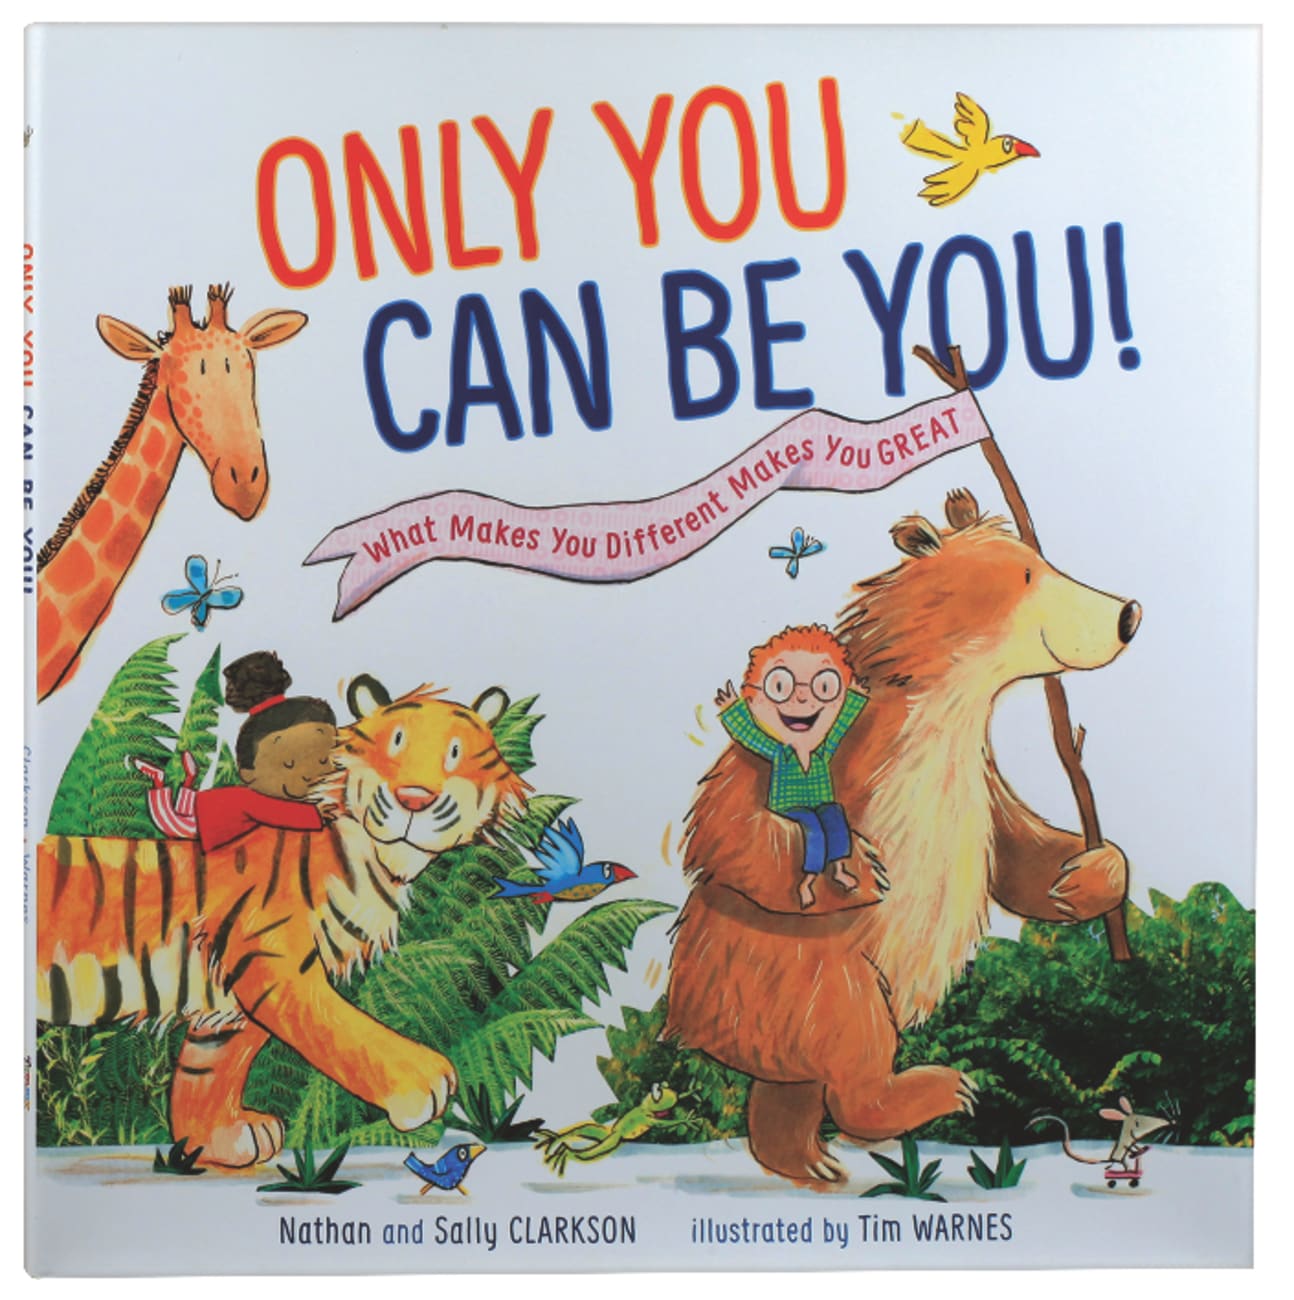 Only You Can Be You: What Makes You Different Makes You Great Hardback